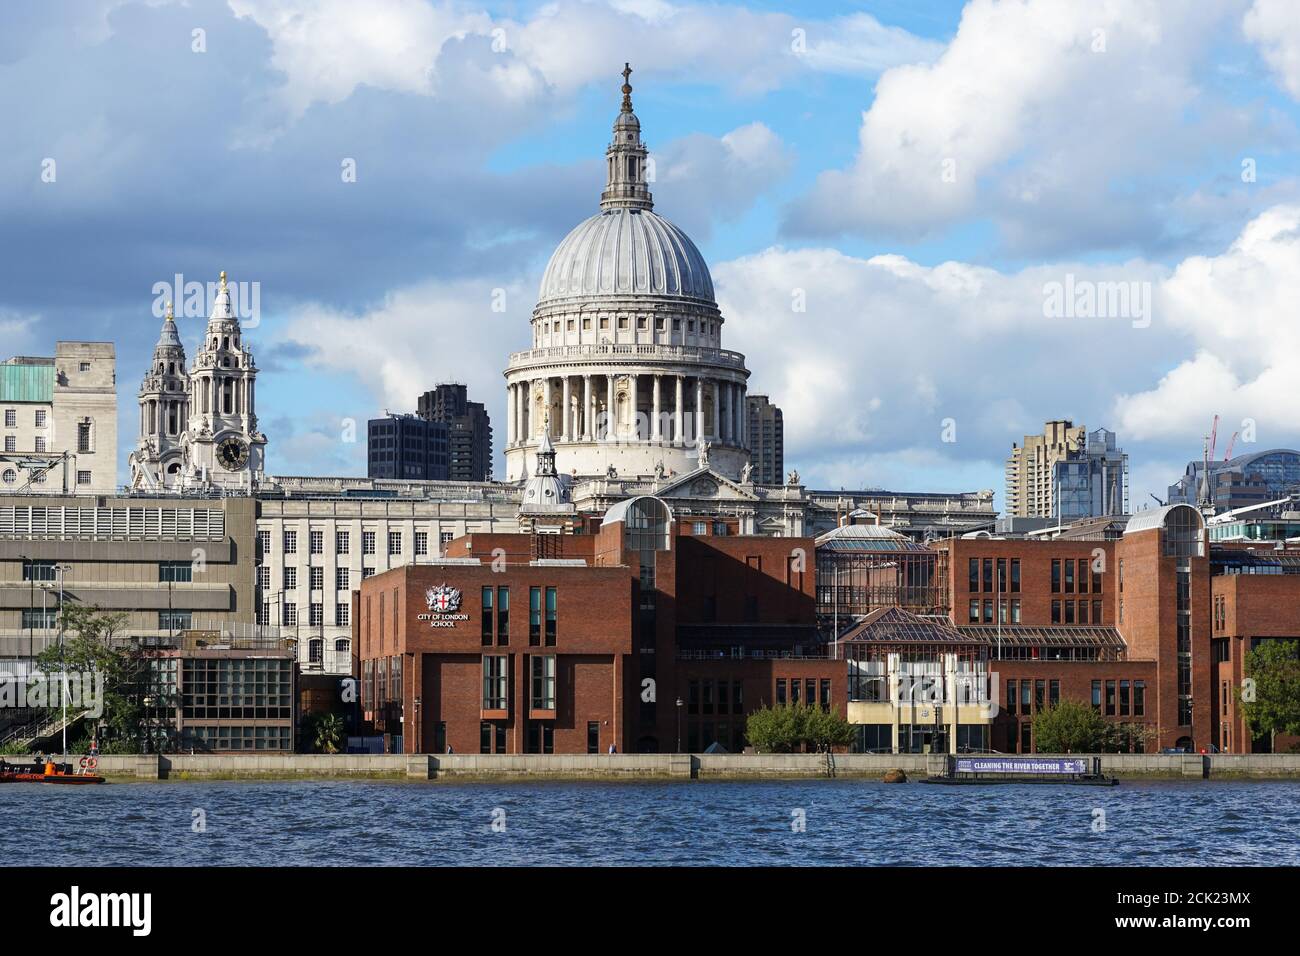 St Paul's Cathedral seen from the river Thames, London England United Kingdom UK Stock Photo